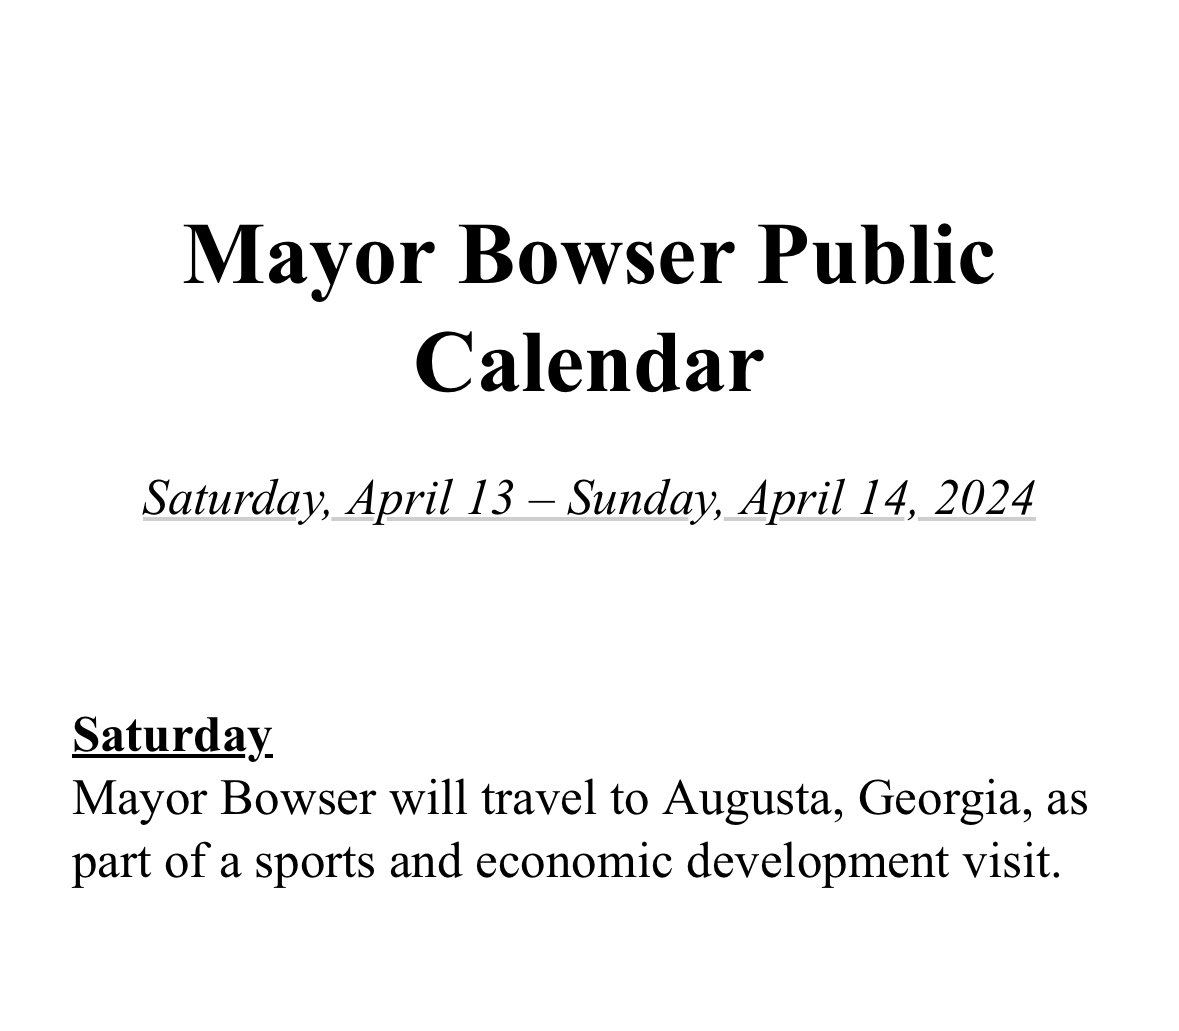 A very important update to Bowser’s schedule: she’s taking a “sports and economic development visit” to Augusta, Georgia today. That’s a heck of a way to say “I’m gonna go watch the Masters”